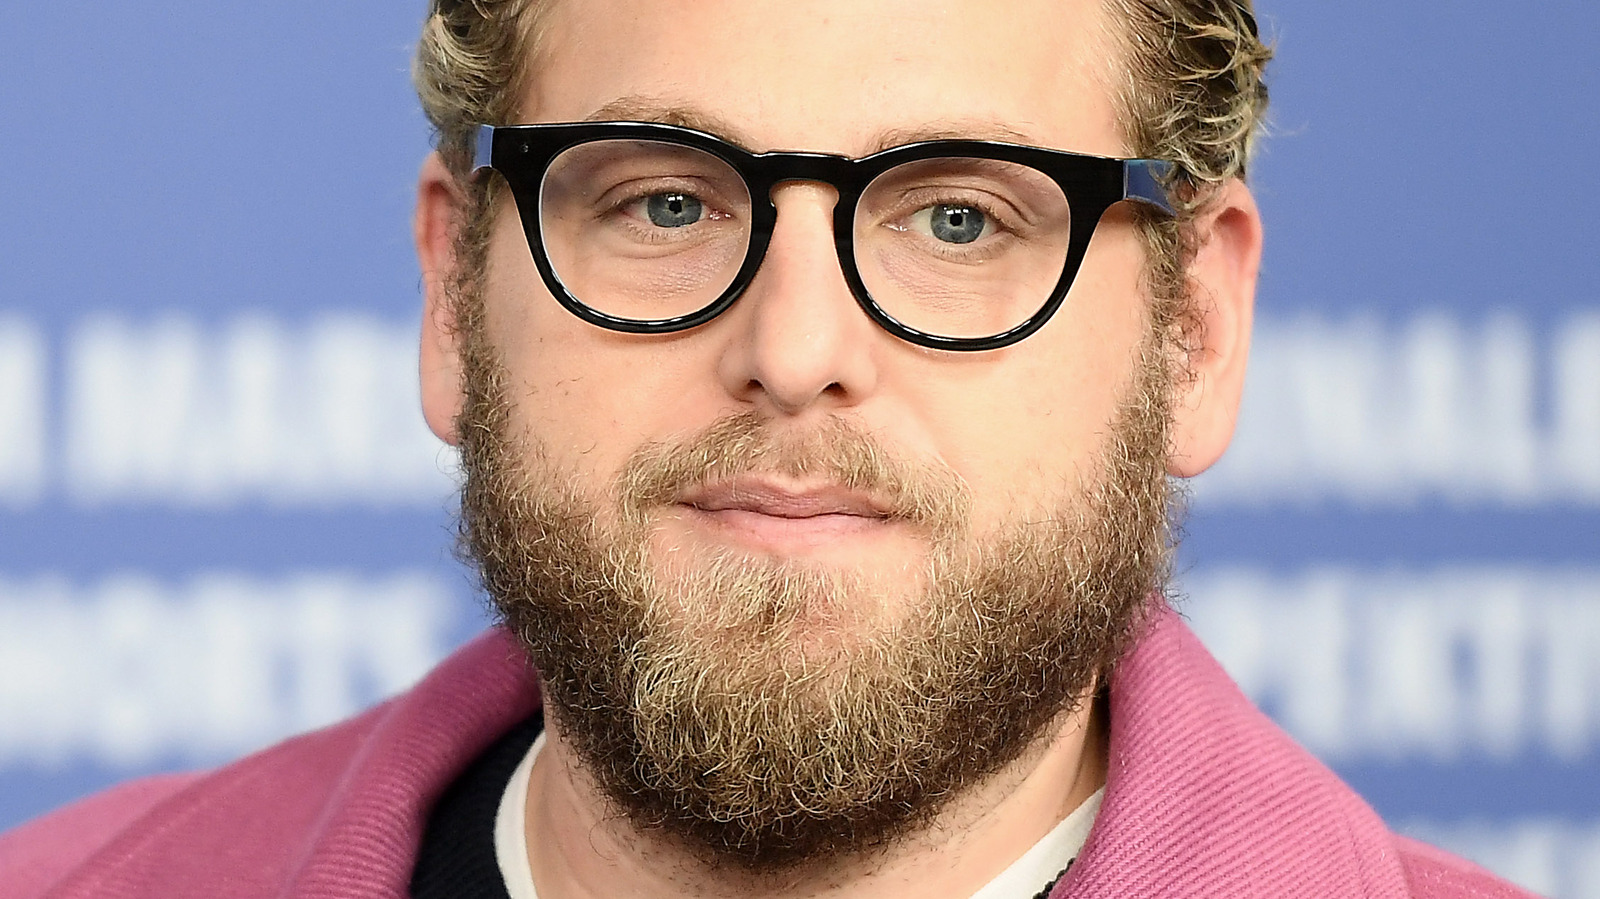 Jonah Hill asks his followers to stop commenting on his body